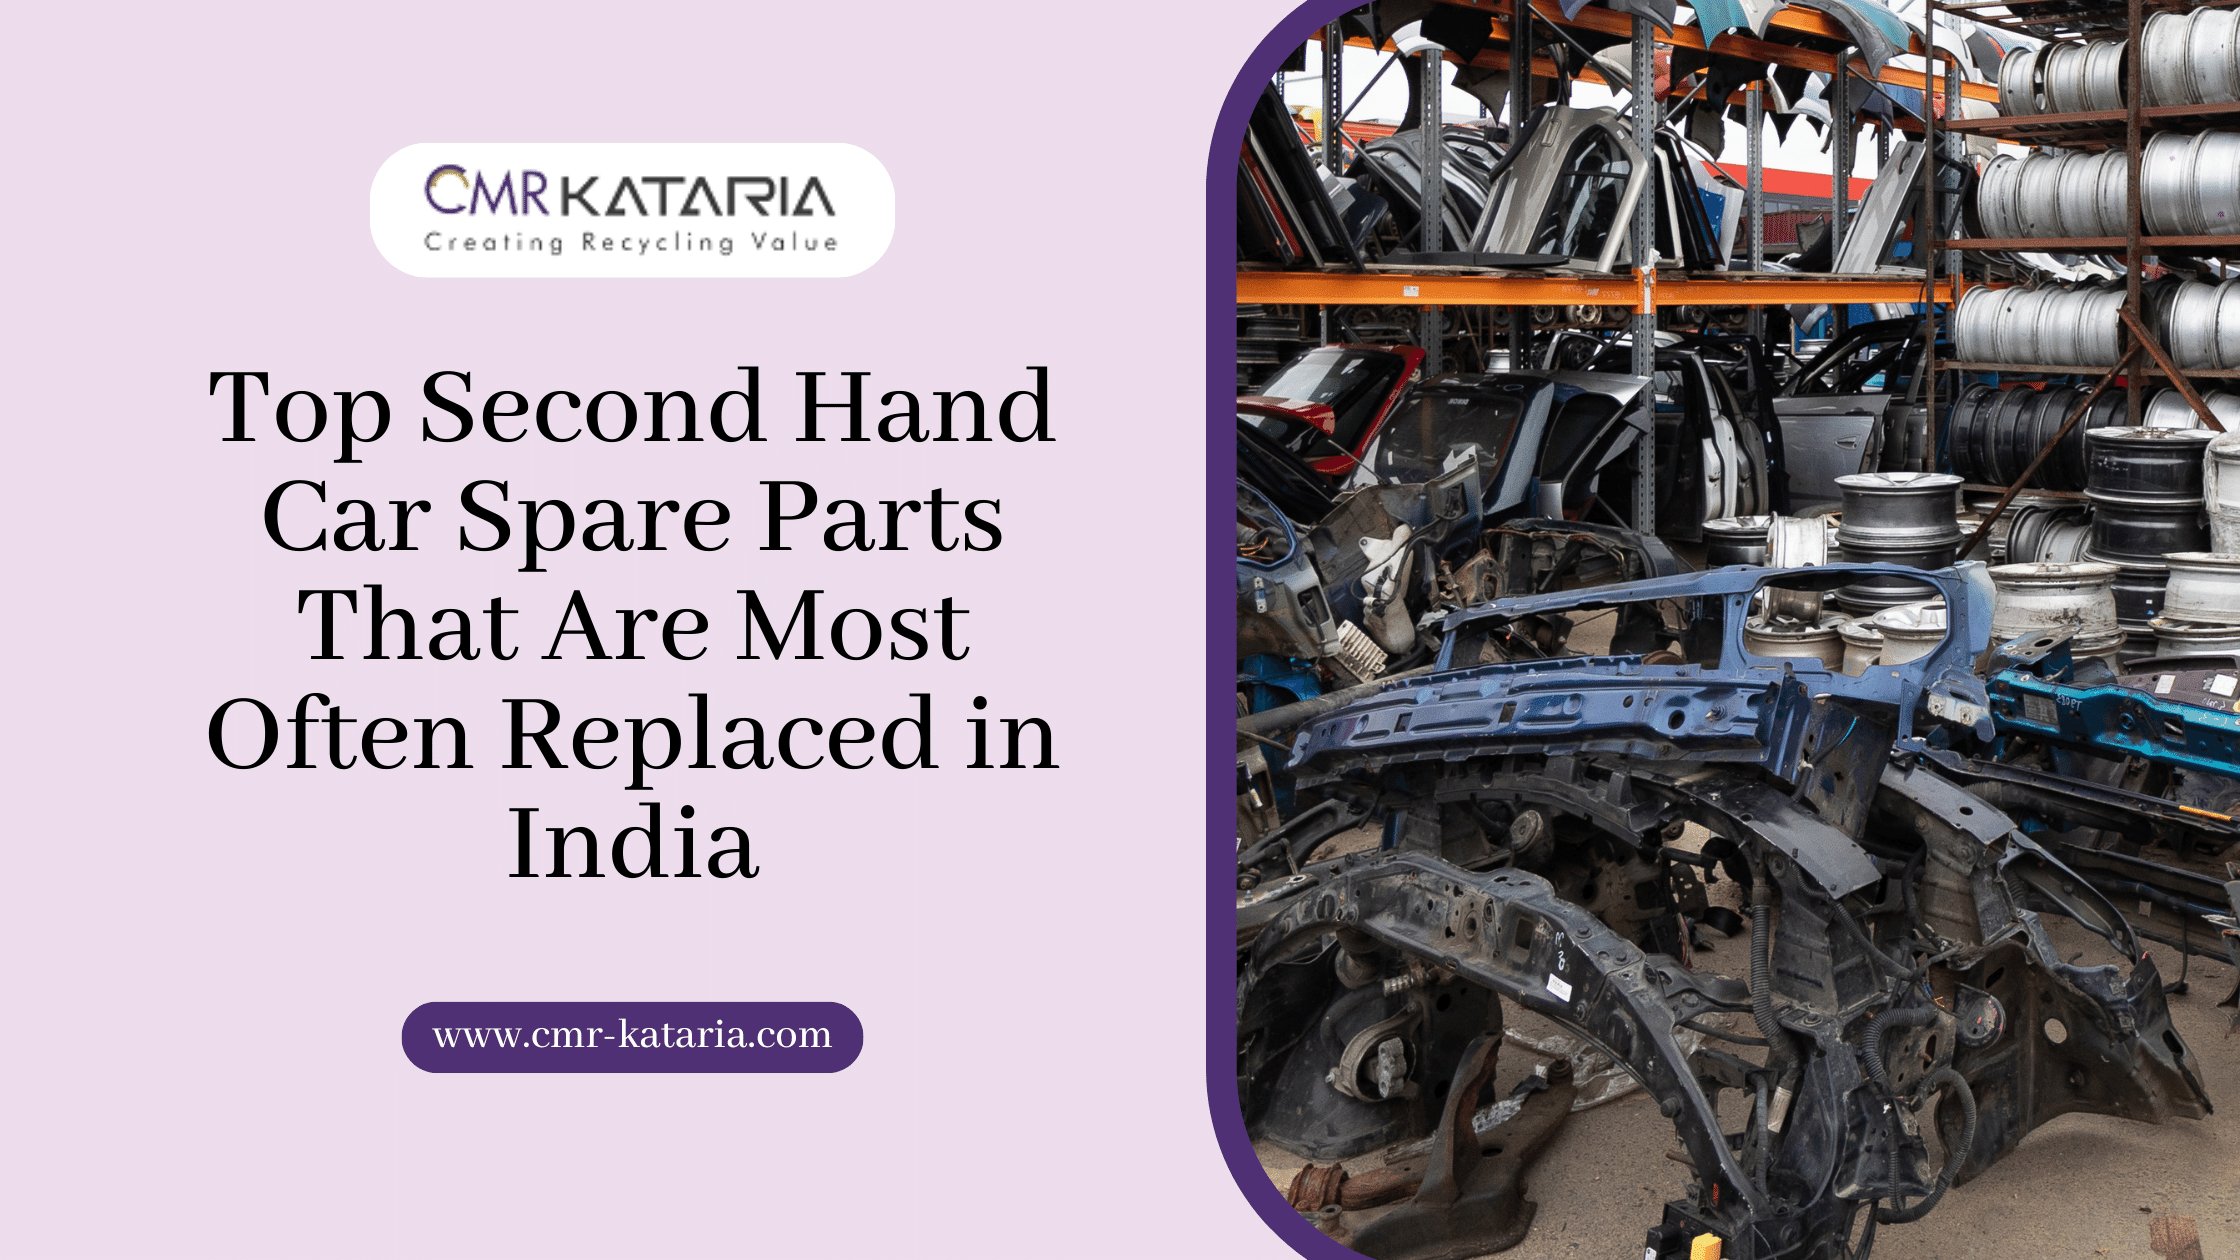 Top Second Hand Car Spare Parts That Are Most Often Replaced in India